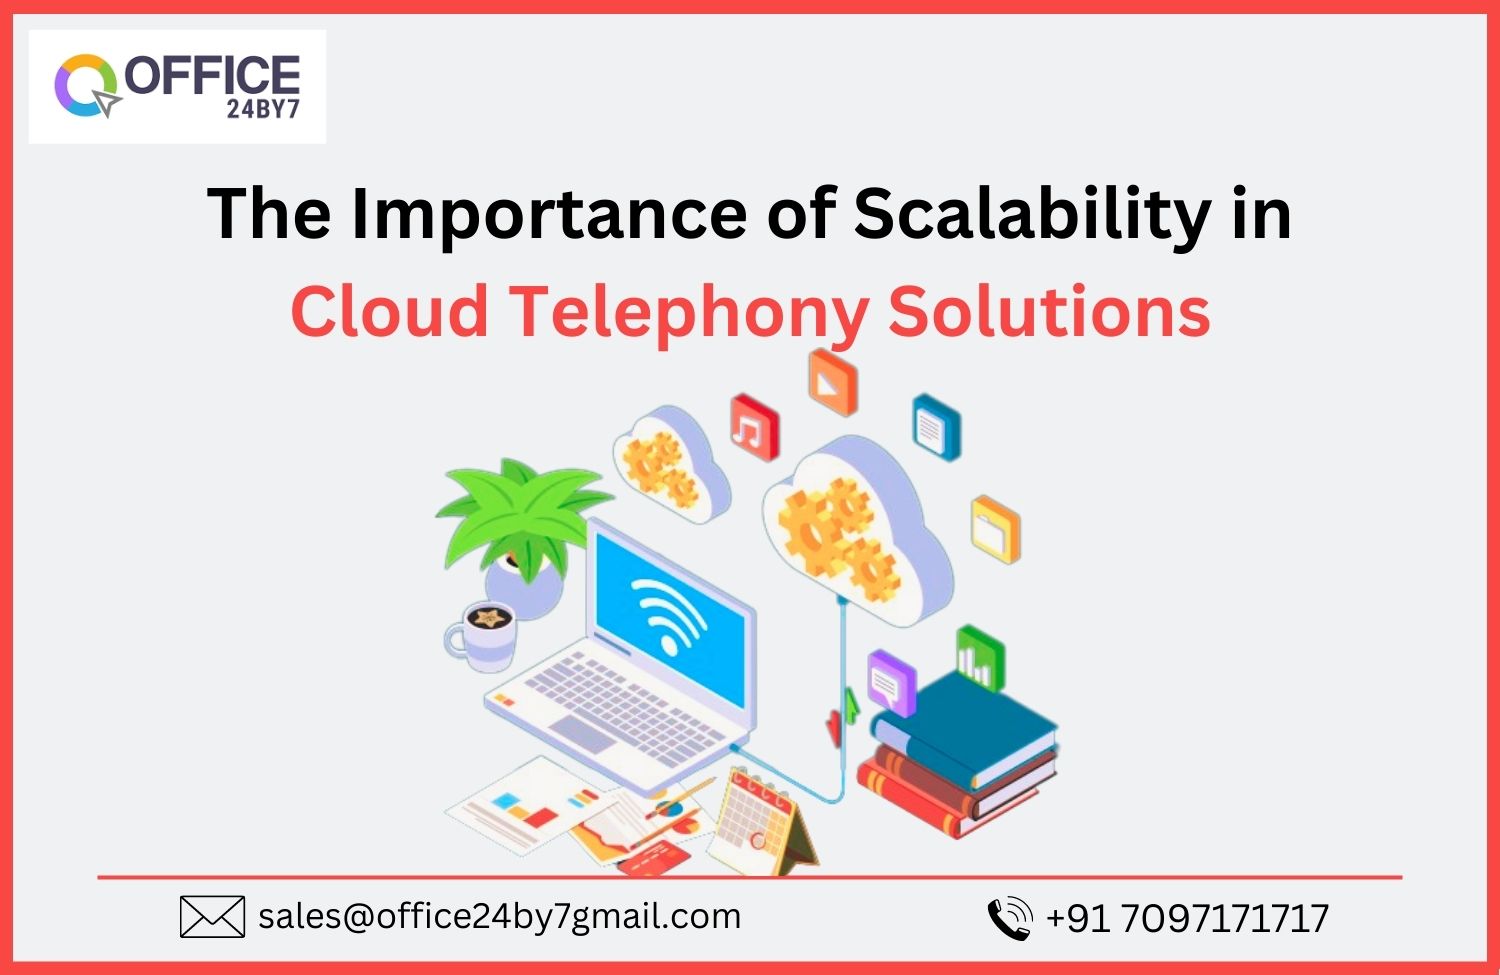 The Importance of Scalability in Cloud Telephony Solutions